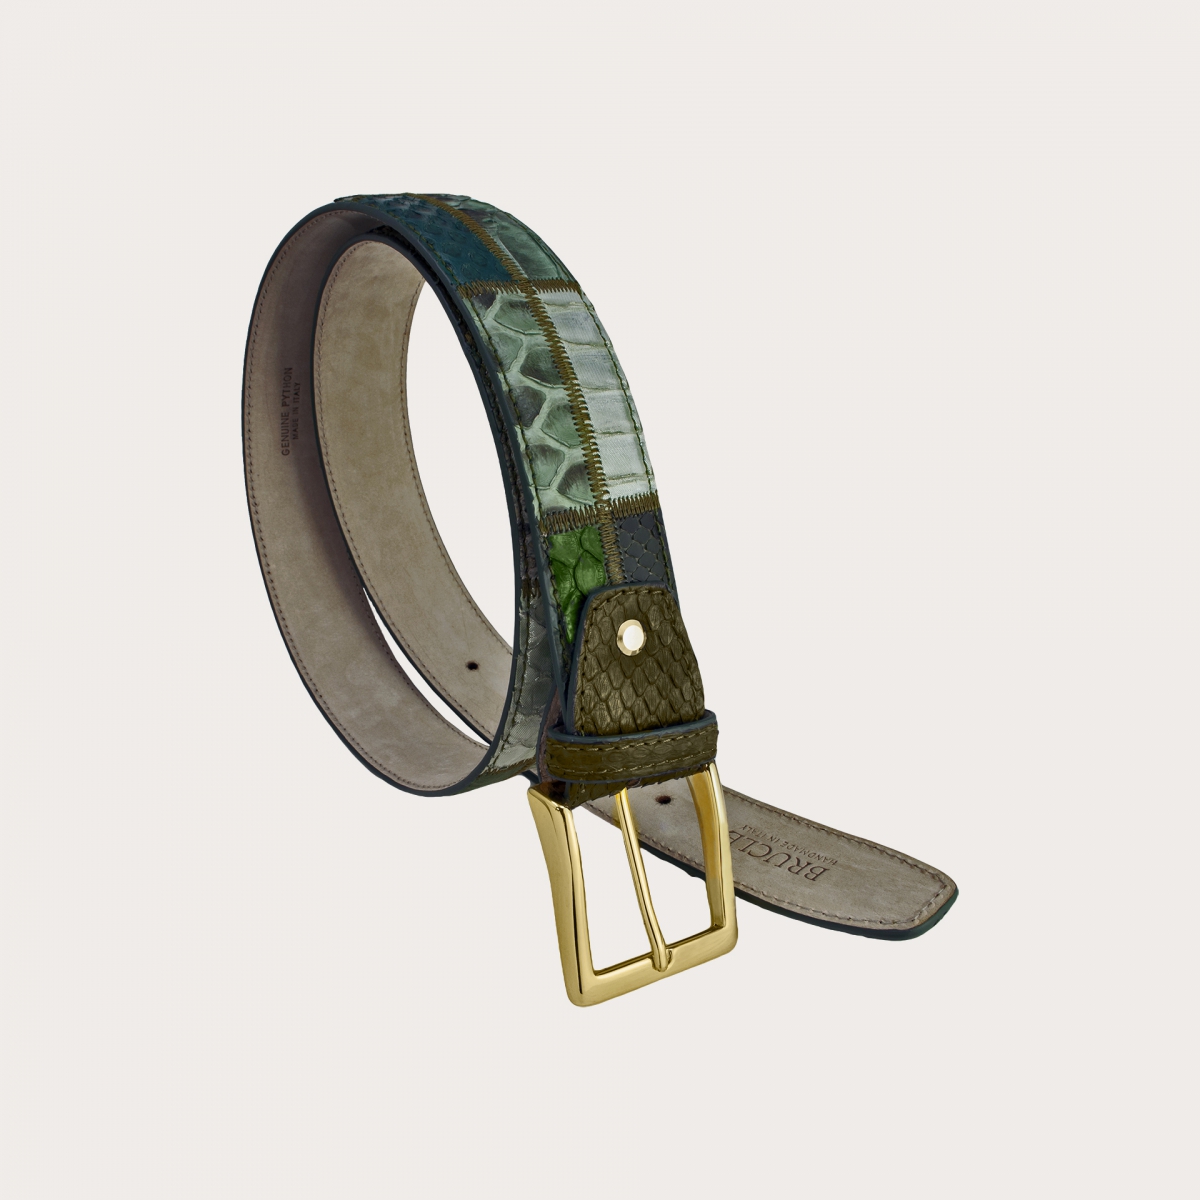 Genuine python leather belt green patchwork with gold buckle